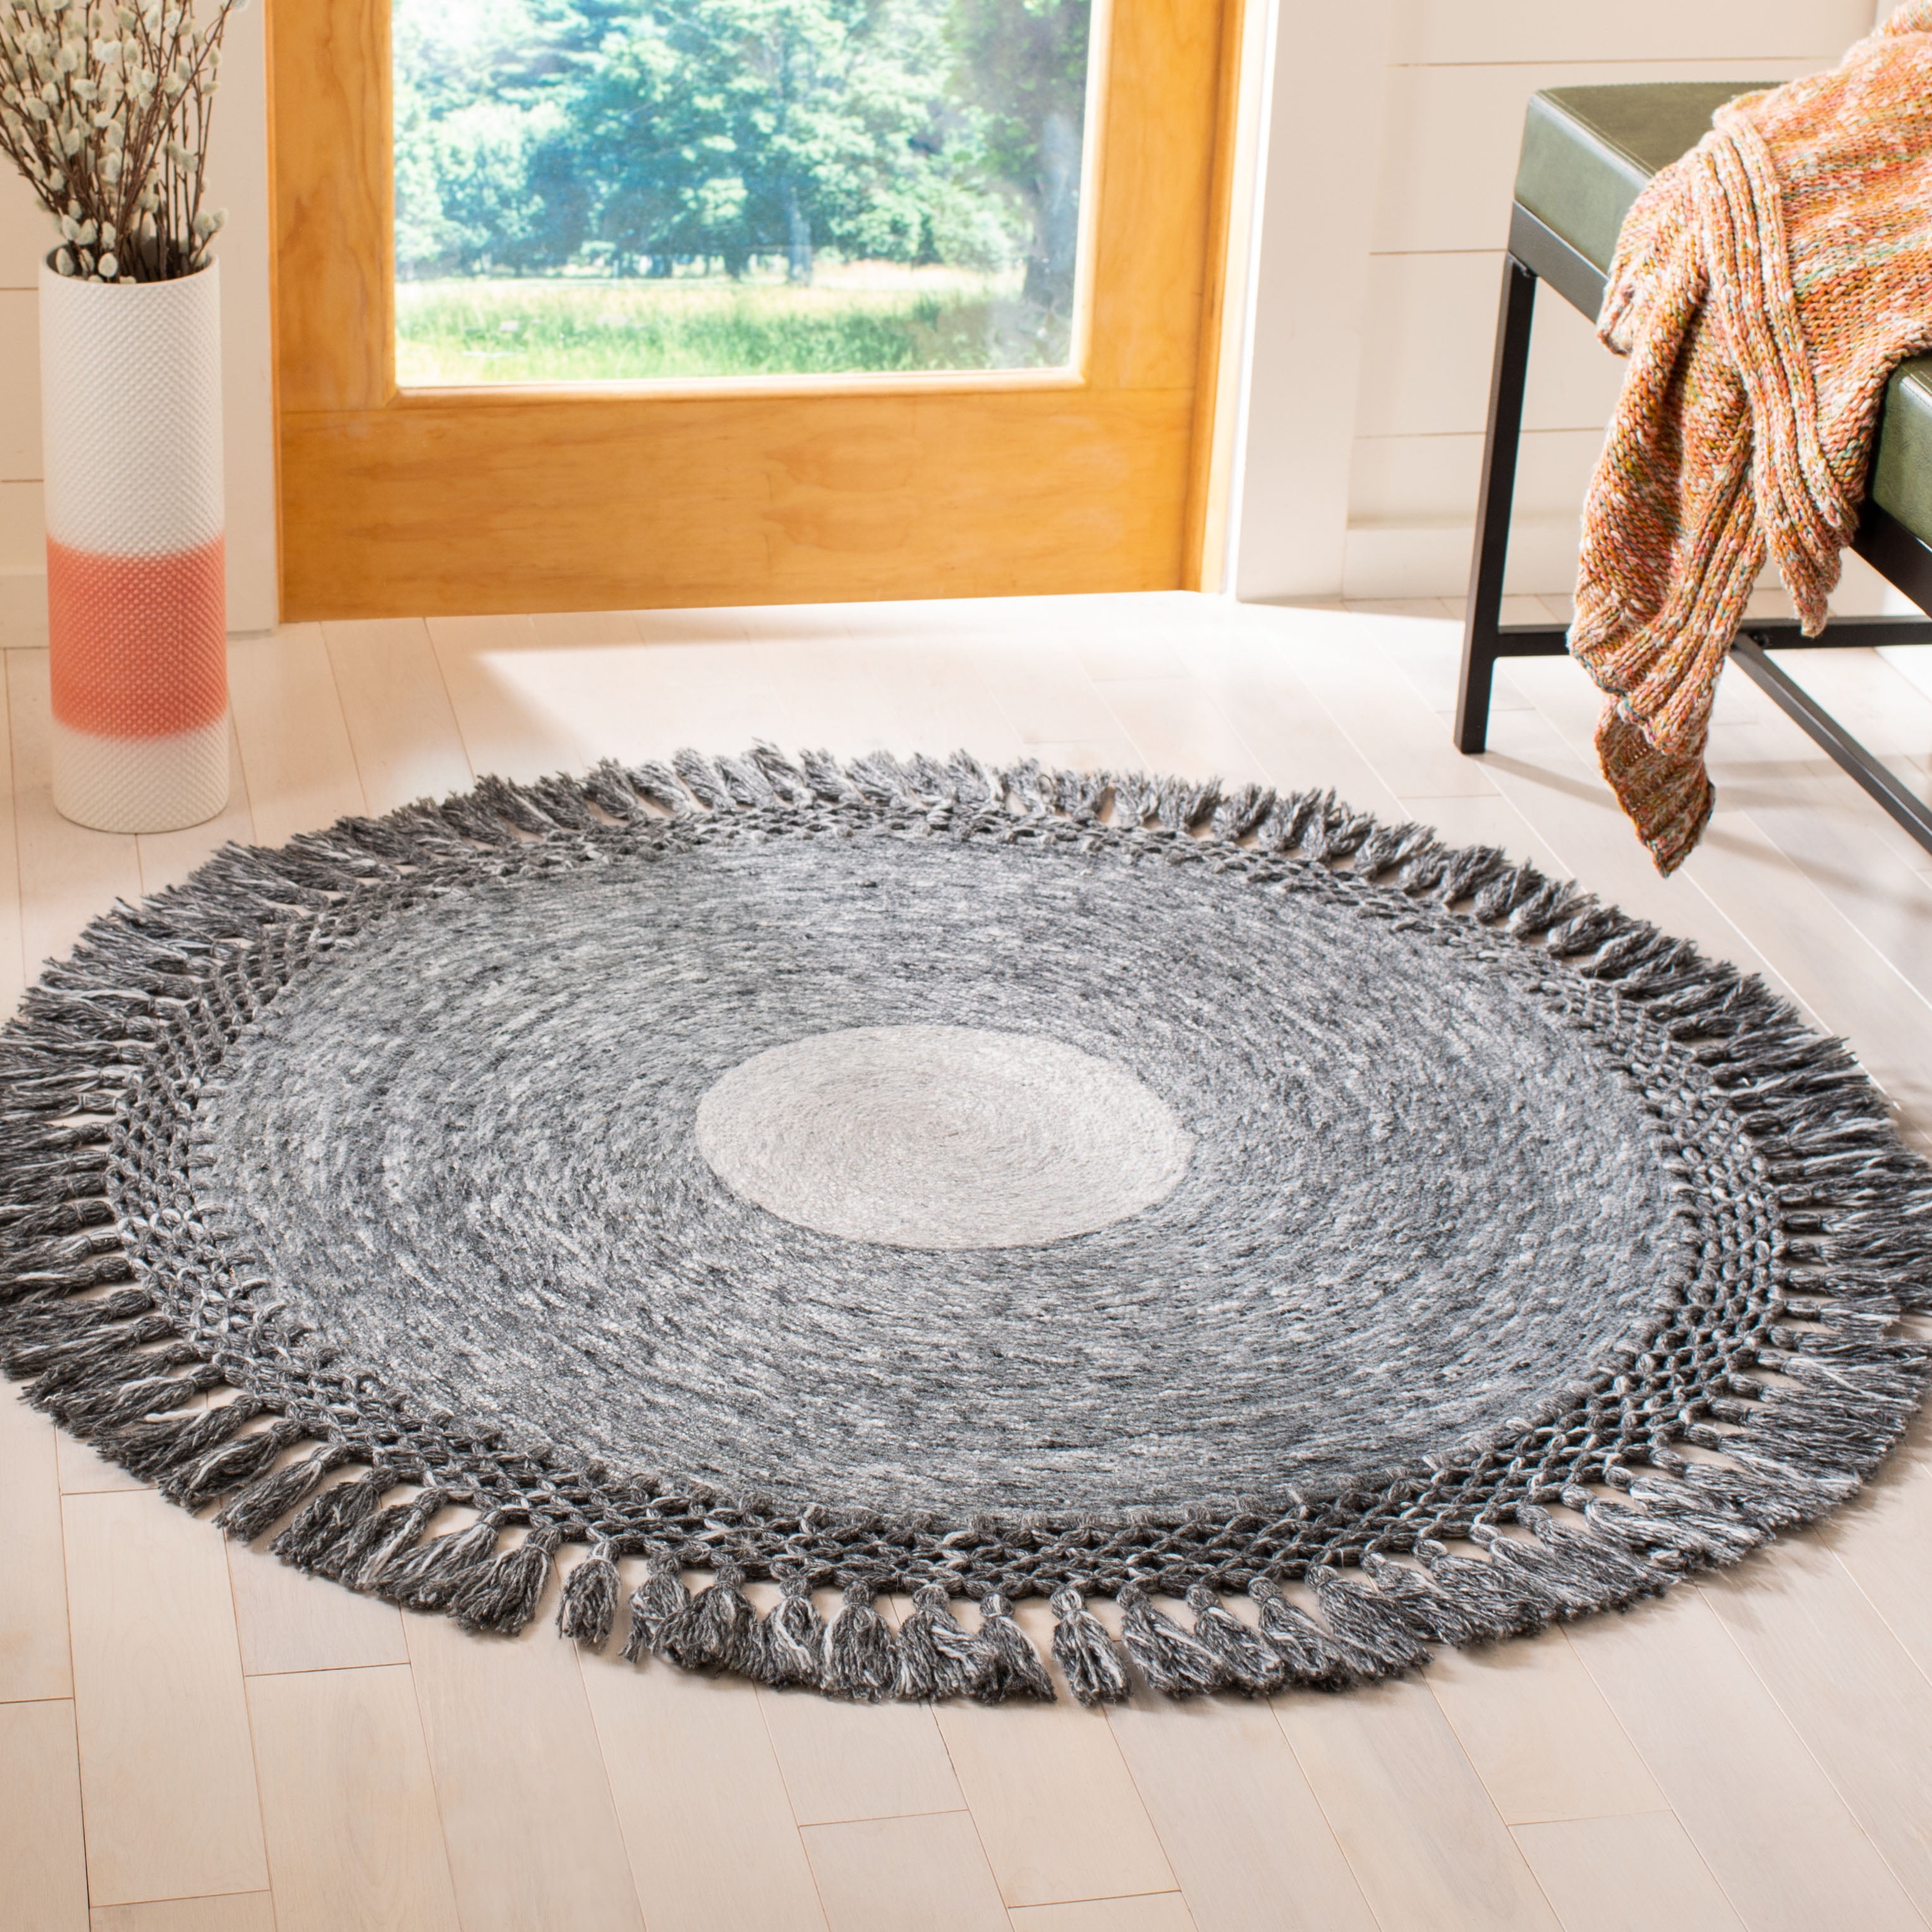 Cool Animal Rooster Leaves 3ft Diameter Non-Slip Circle Rugs Soft Throw Rugs Machine Washable Floor Carpet for Sofa Living Room Bedroom Nursery Kids Playroom Decor Round Area Rug